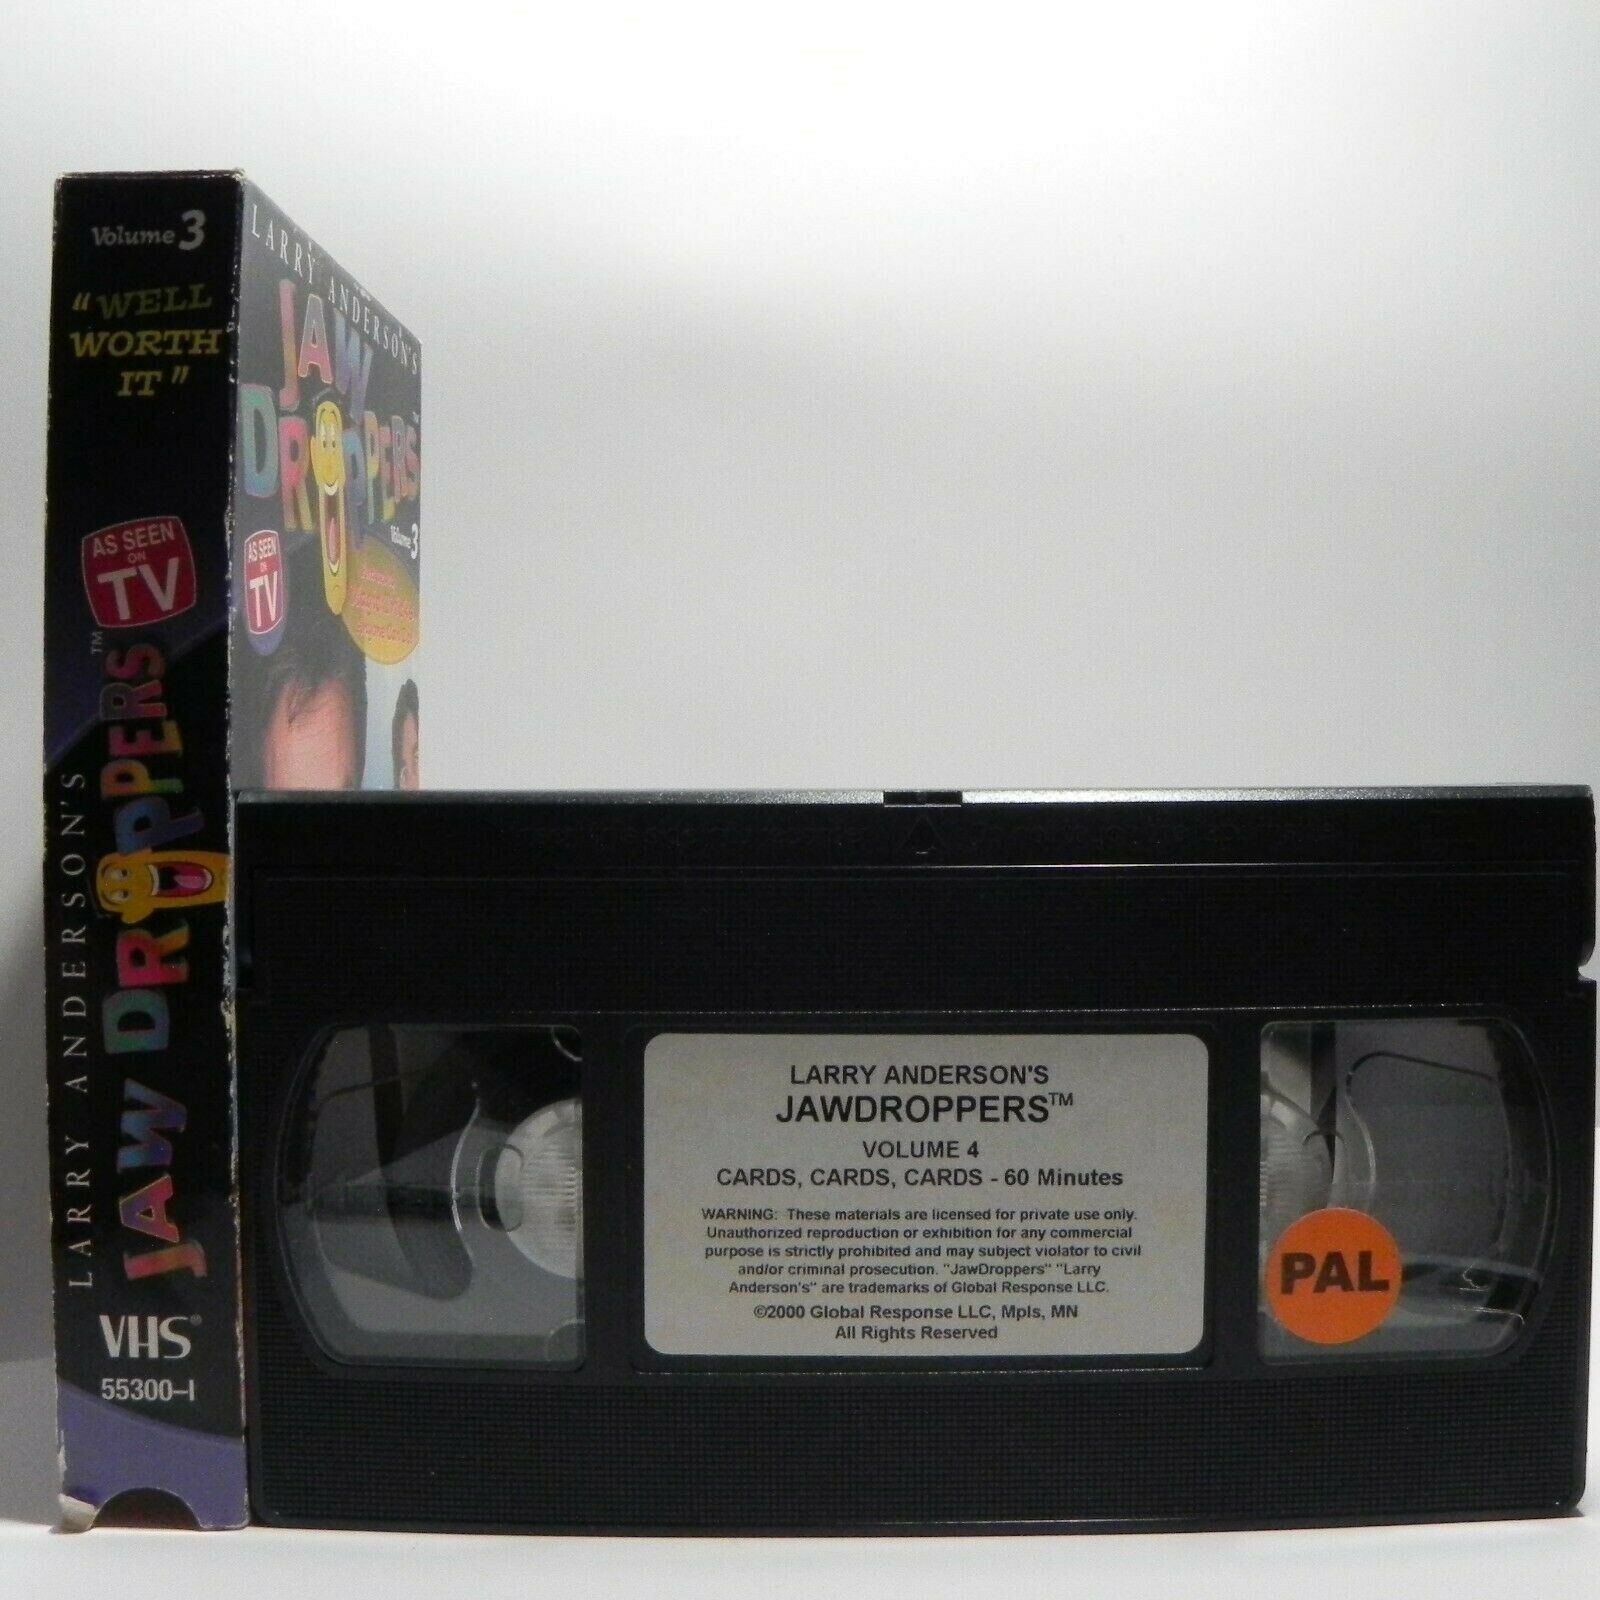 Jaw Droppers Vol.3: Ready, Set, Go - Larry Anderson - Magic Tricks - Pal VHS-